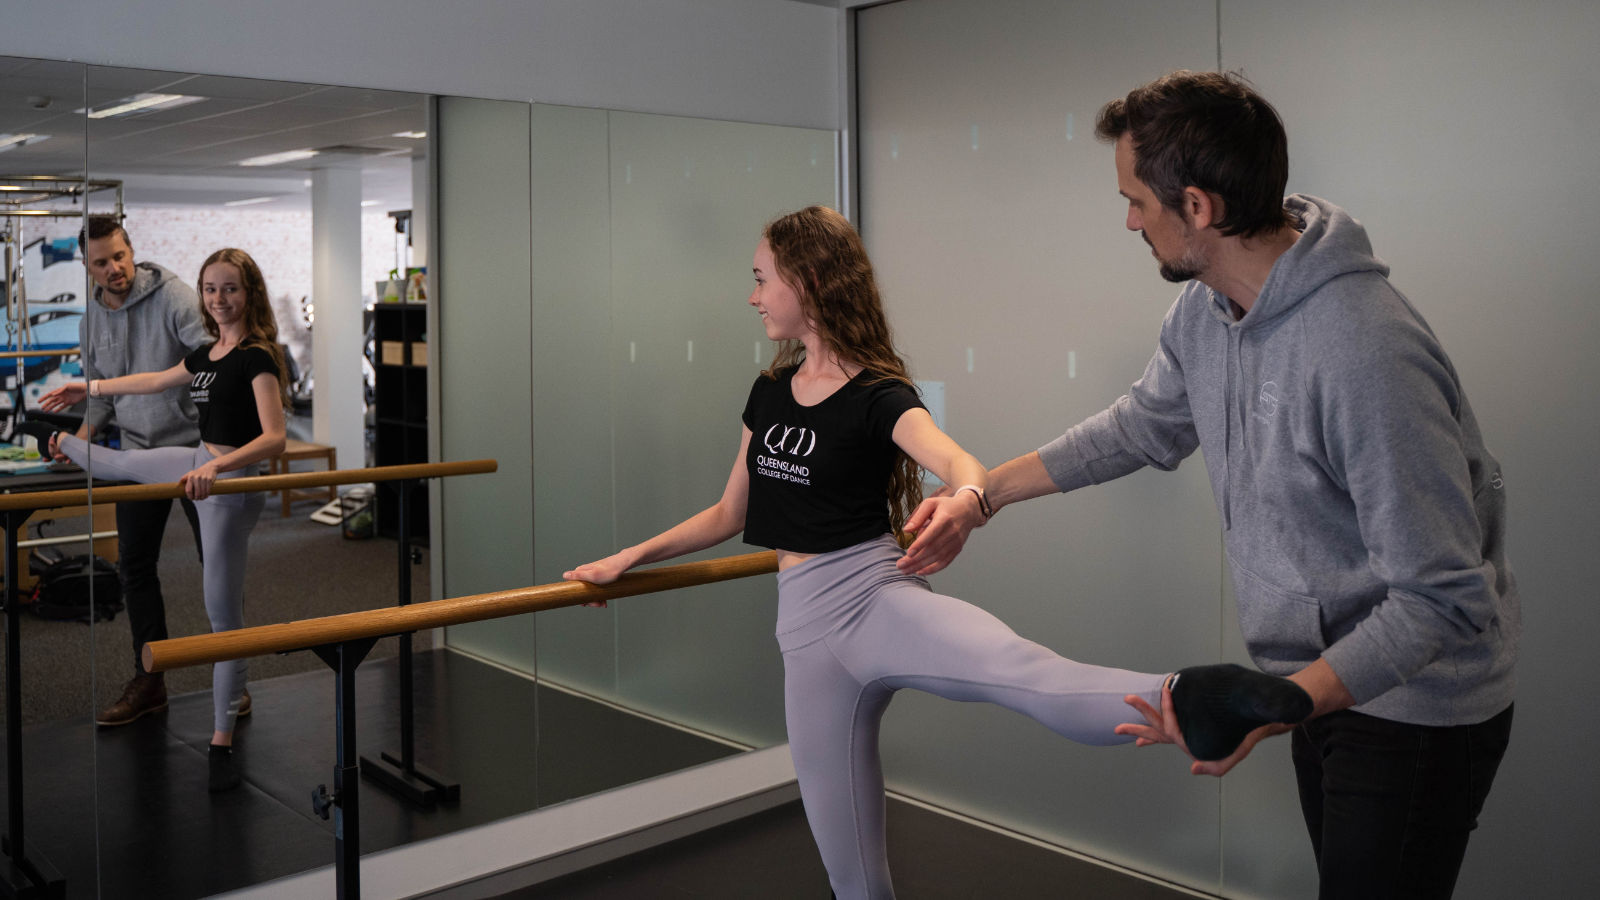 Dancer being trained in the studio